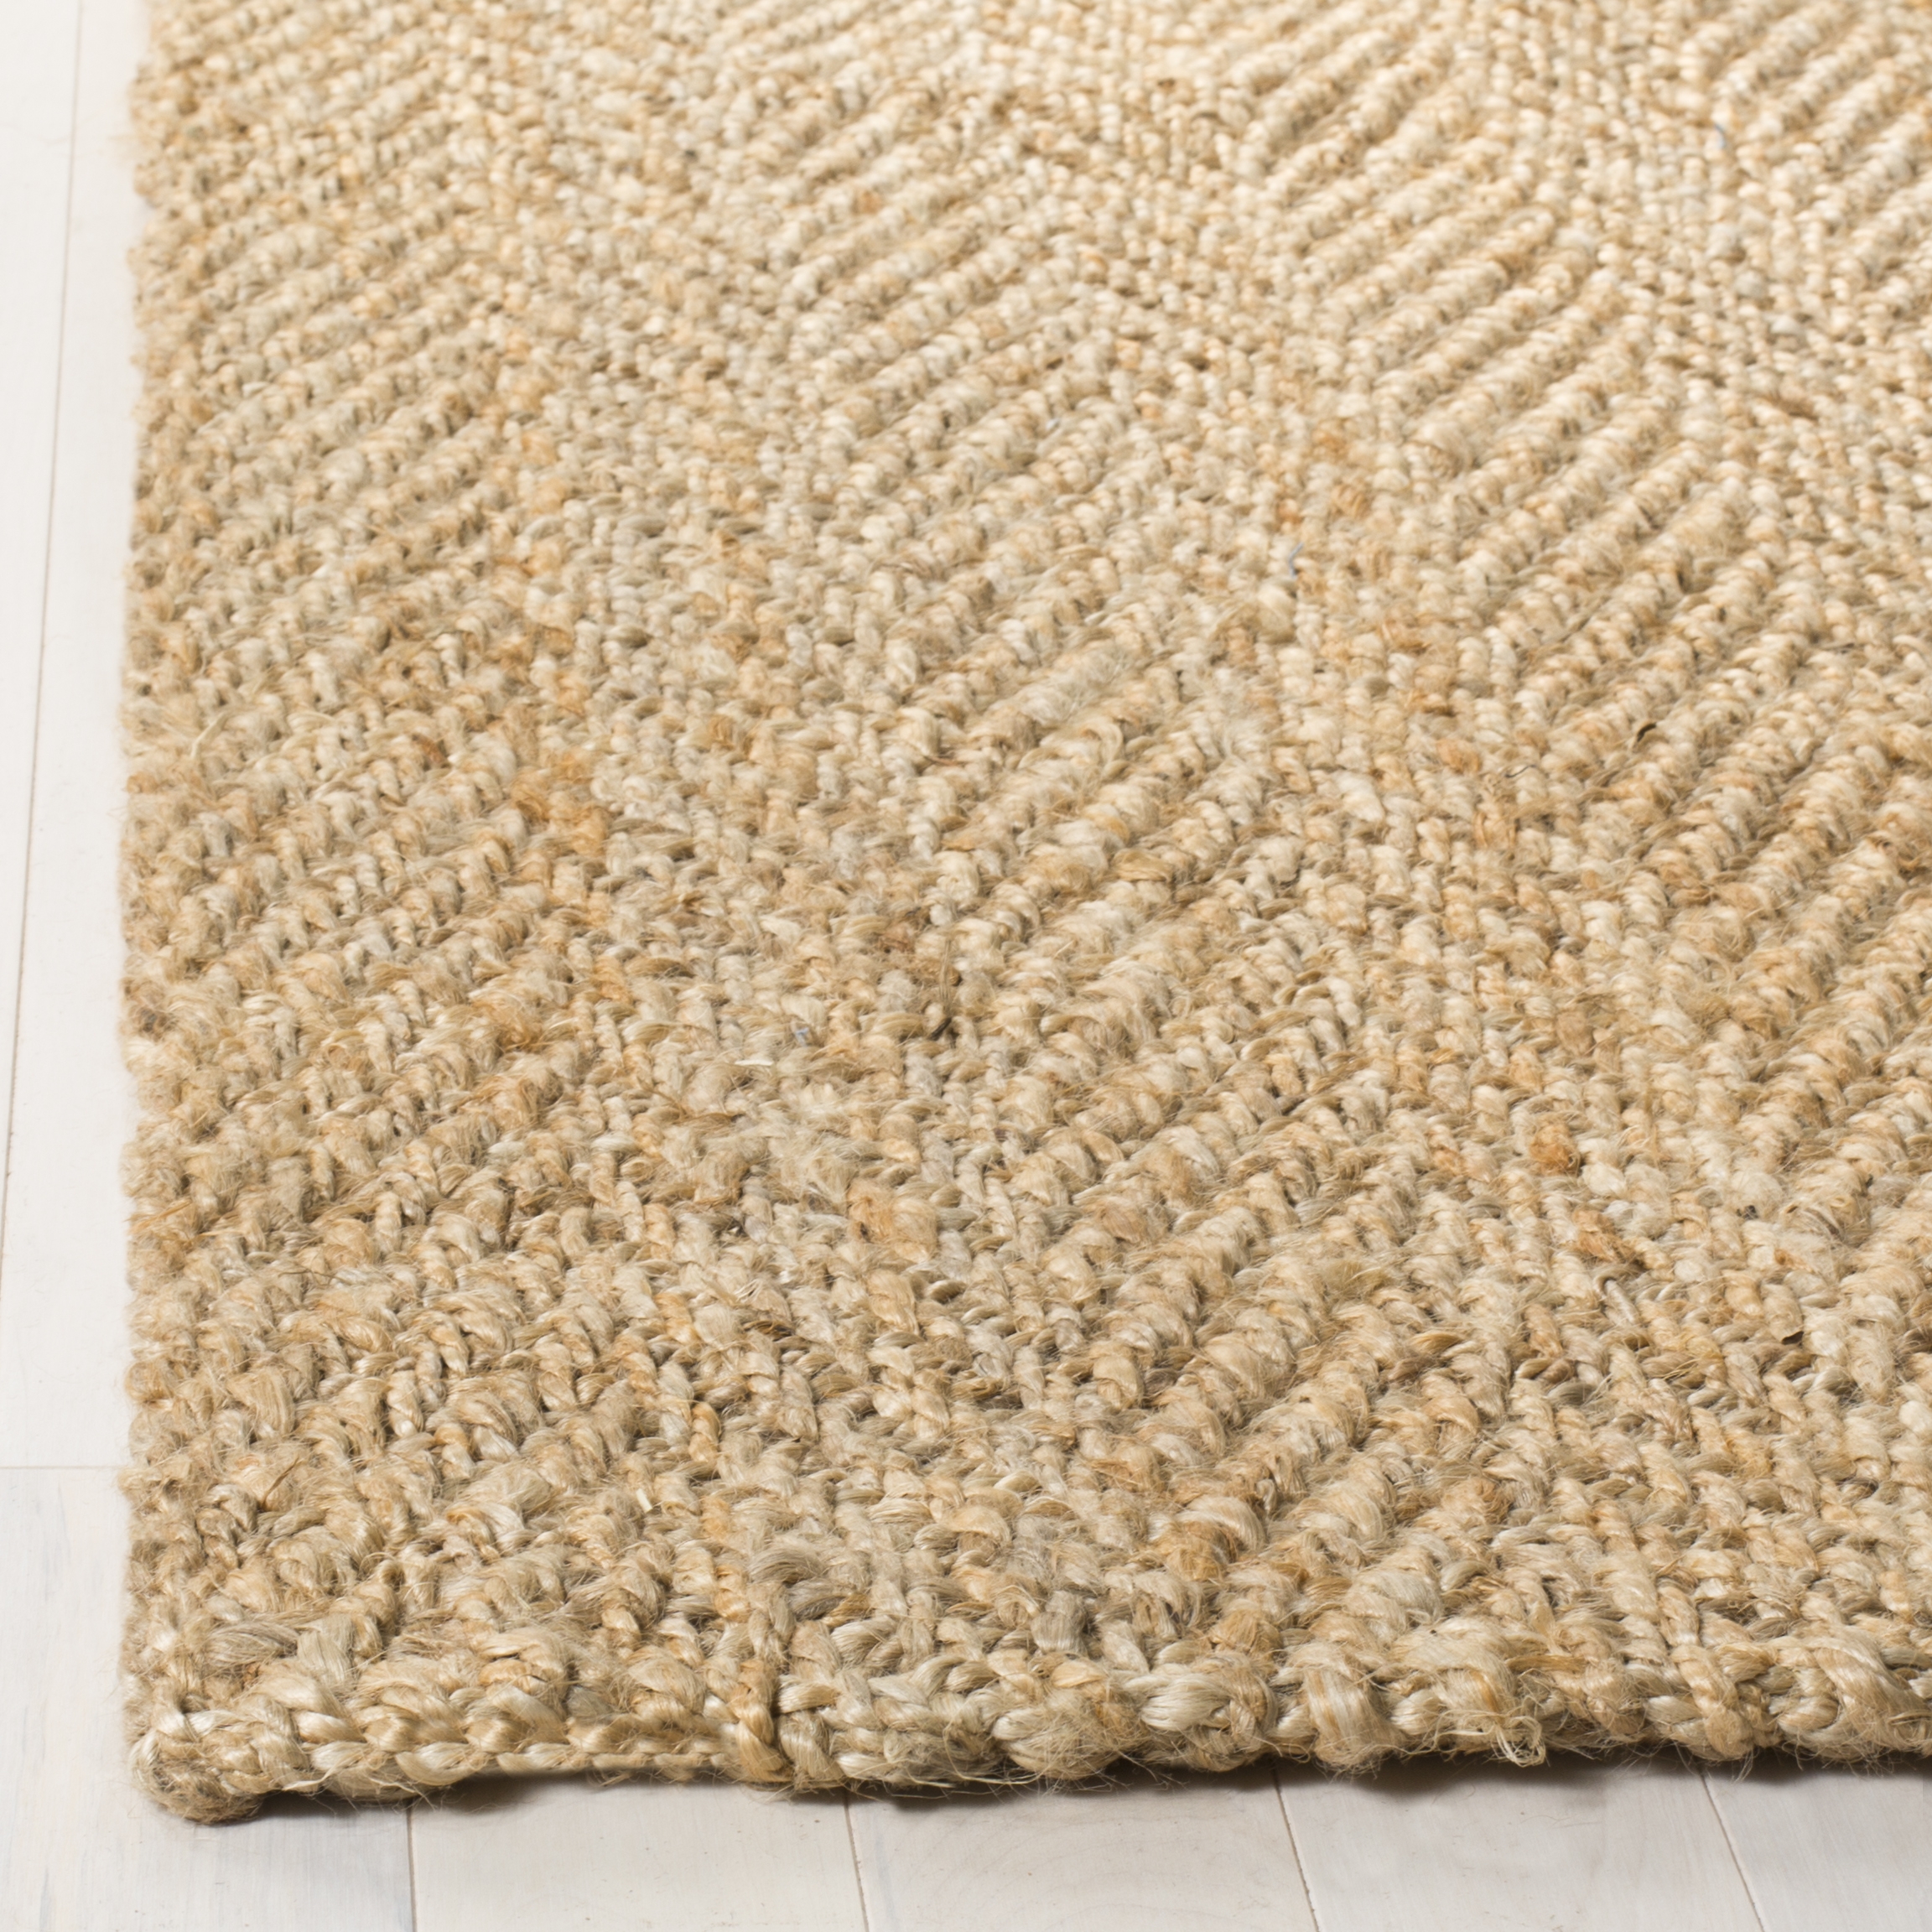 Arlo Home Hand Woven Area Rug, NF263A, Natural,  2' 3" X 10' - Image 2